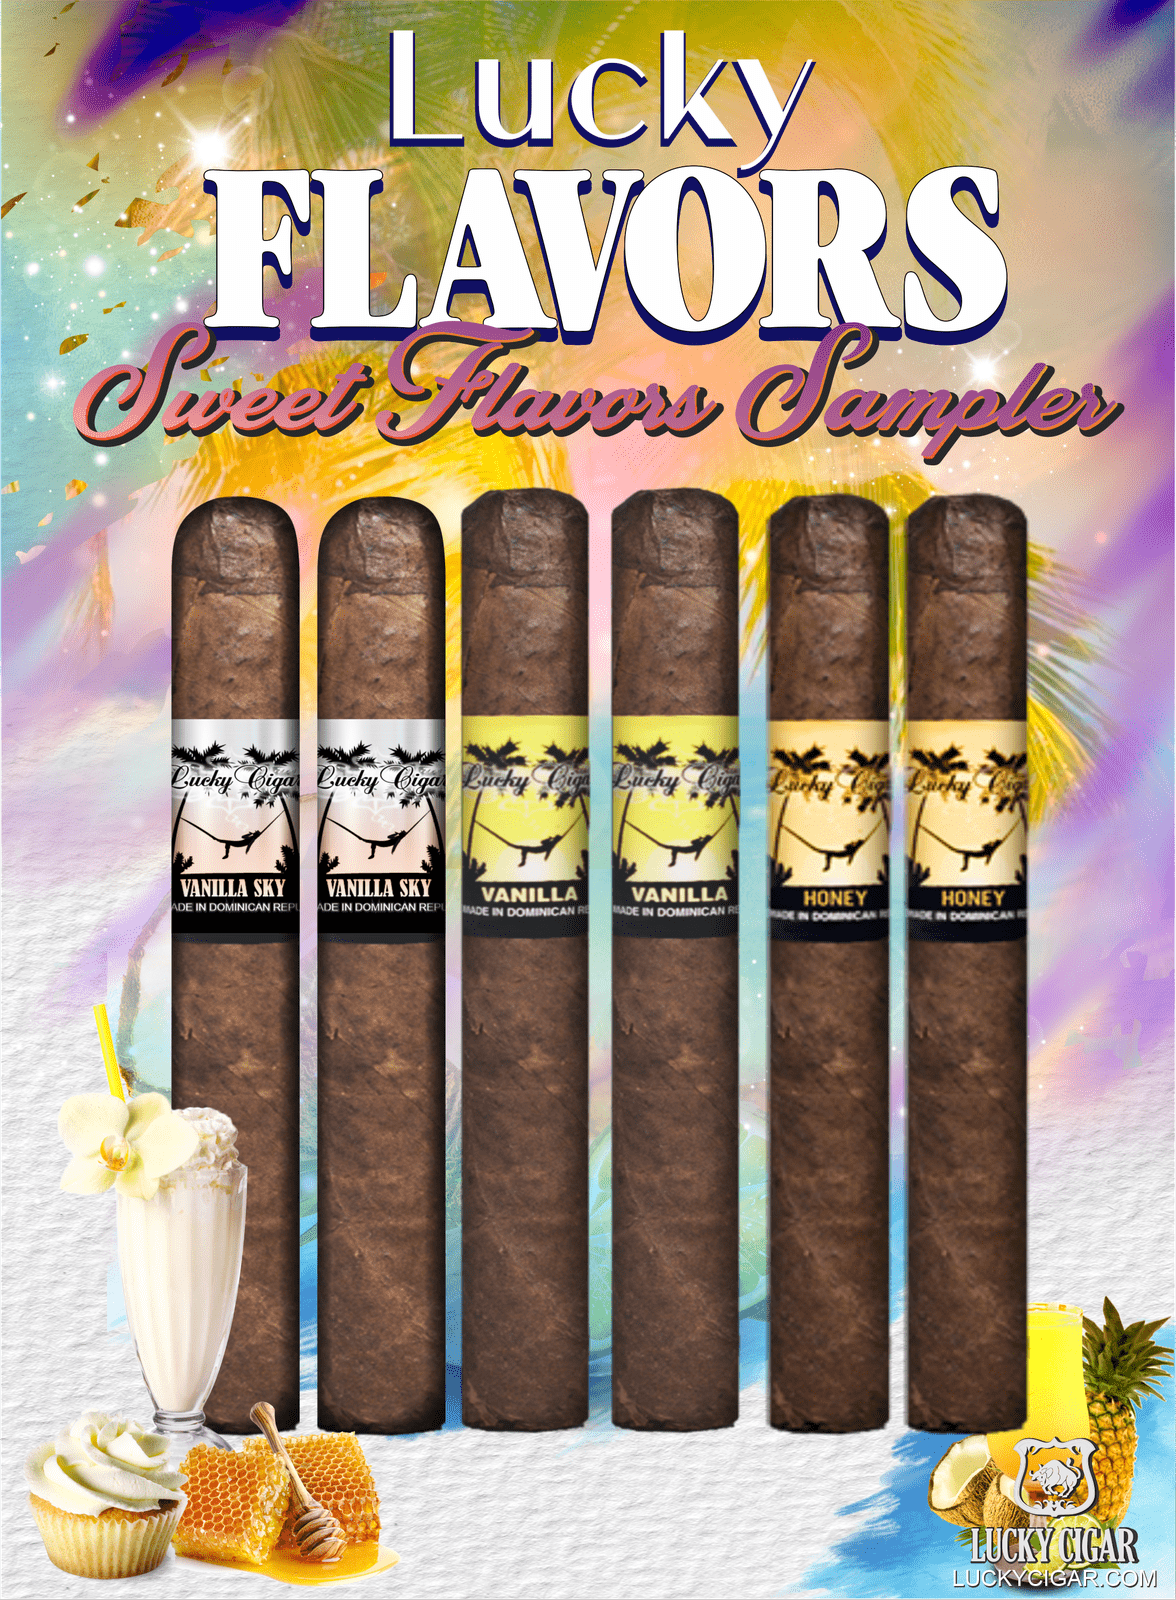 Flavored Cigars: Lucky Flavors 6 Piece Sweets Sampler - Vanilla Sky, Vanilla, Honey 2 Vanilla Sky 5x42 Cigars 2 Vanilla 5x42 Cigars 2 Honey 5x42 Cigars